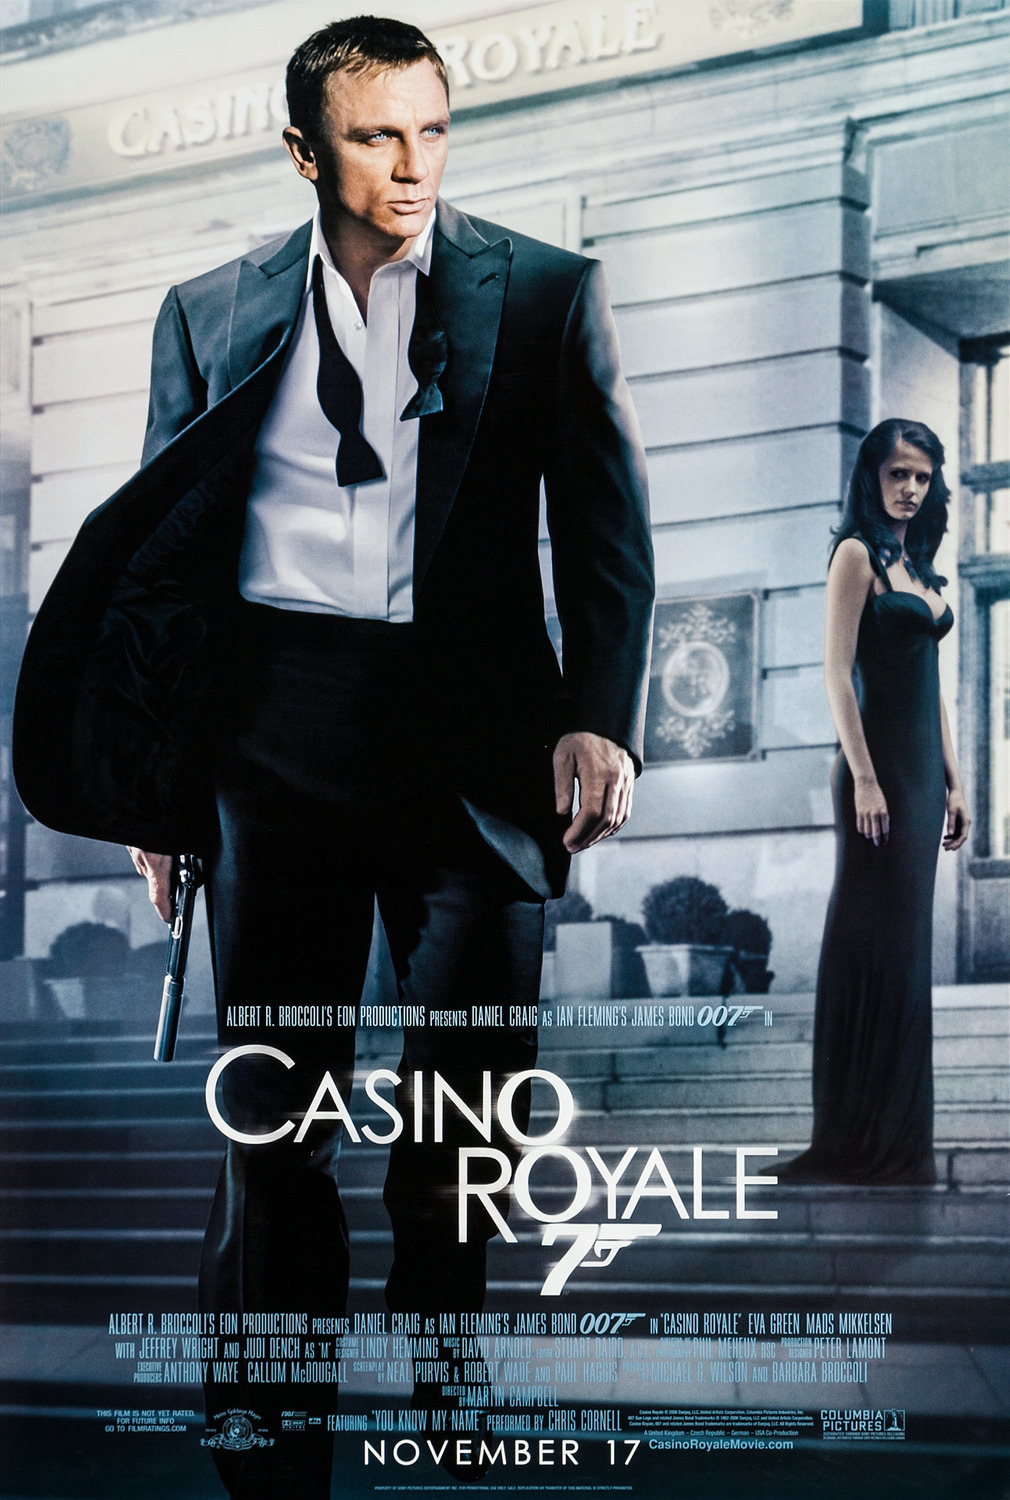 theme from casino royale movie